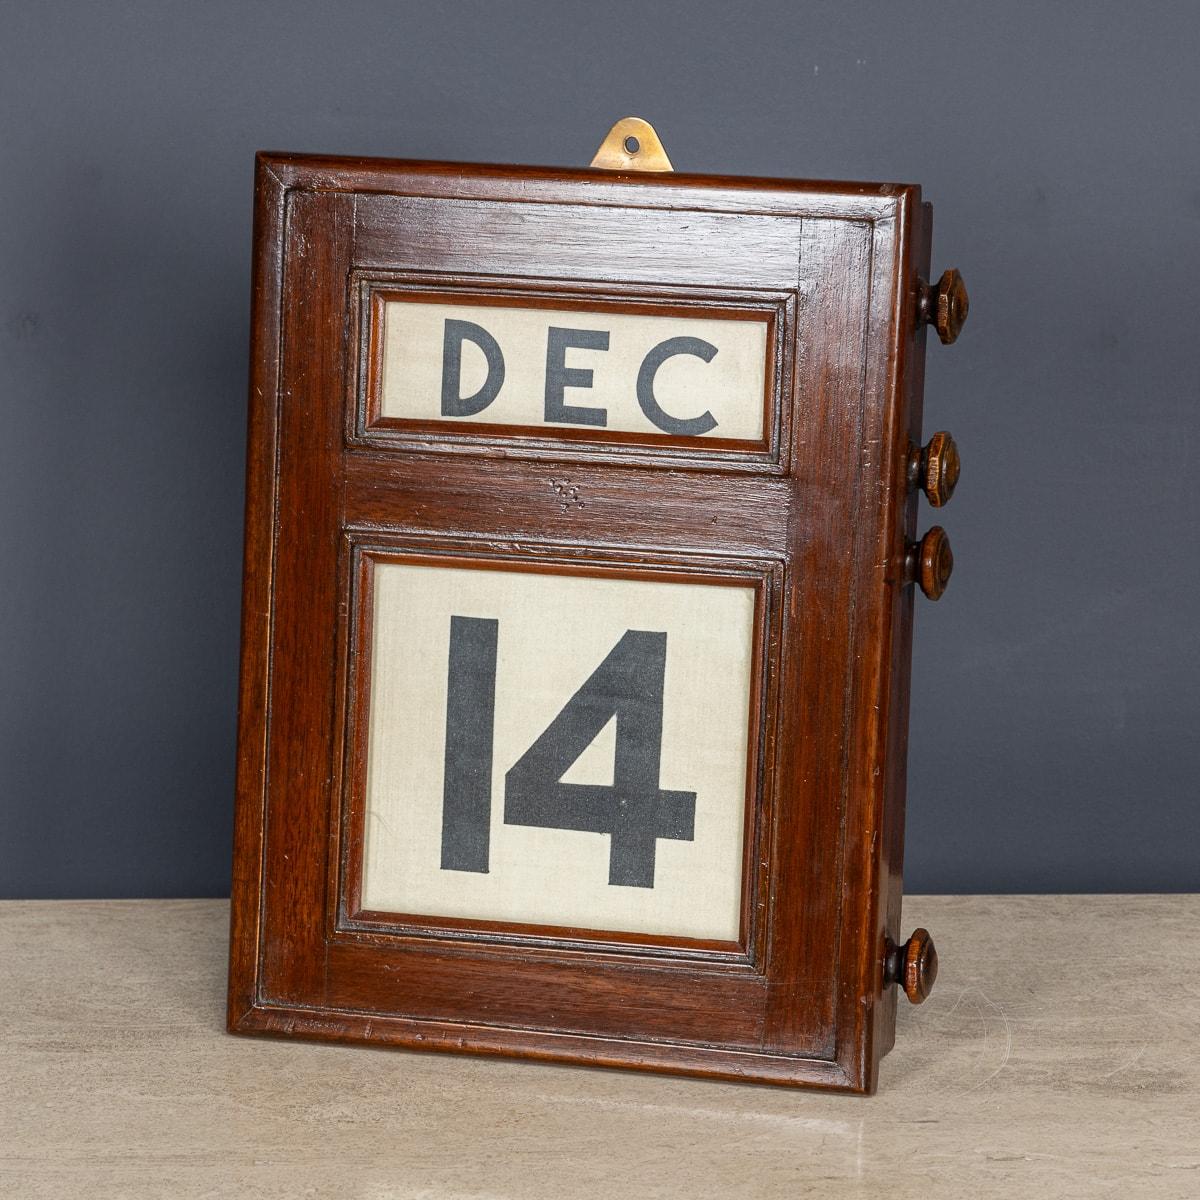 A superb 20th Century perpetual desk calendar, made from mahogany. Featuring four knobs on one side, these are used to move forward and rewind the day and date behind three glazed apertures. On the rear, an attachment to hang the calendar on the